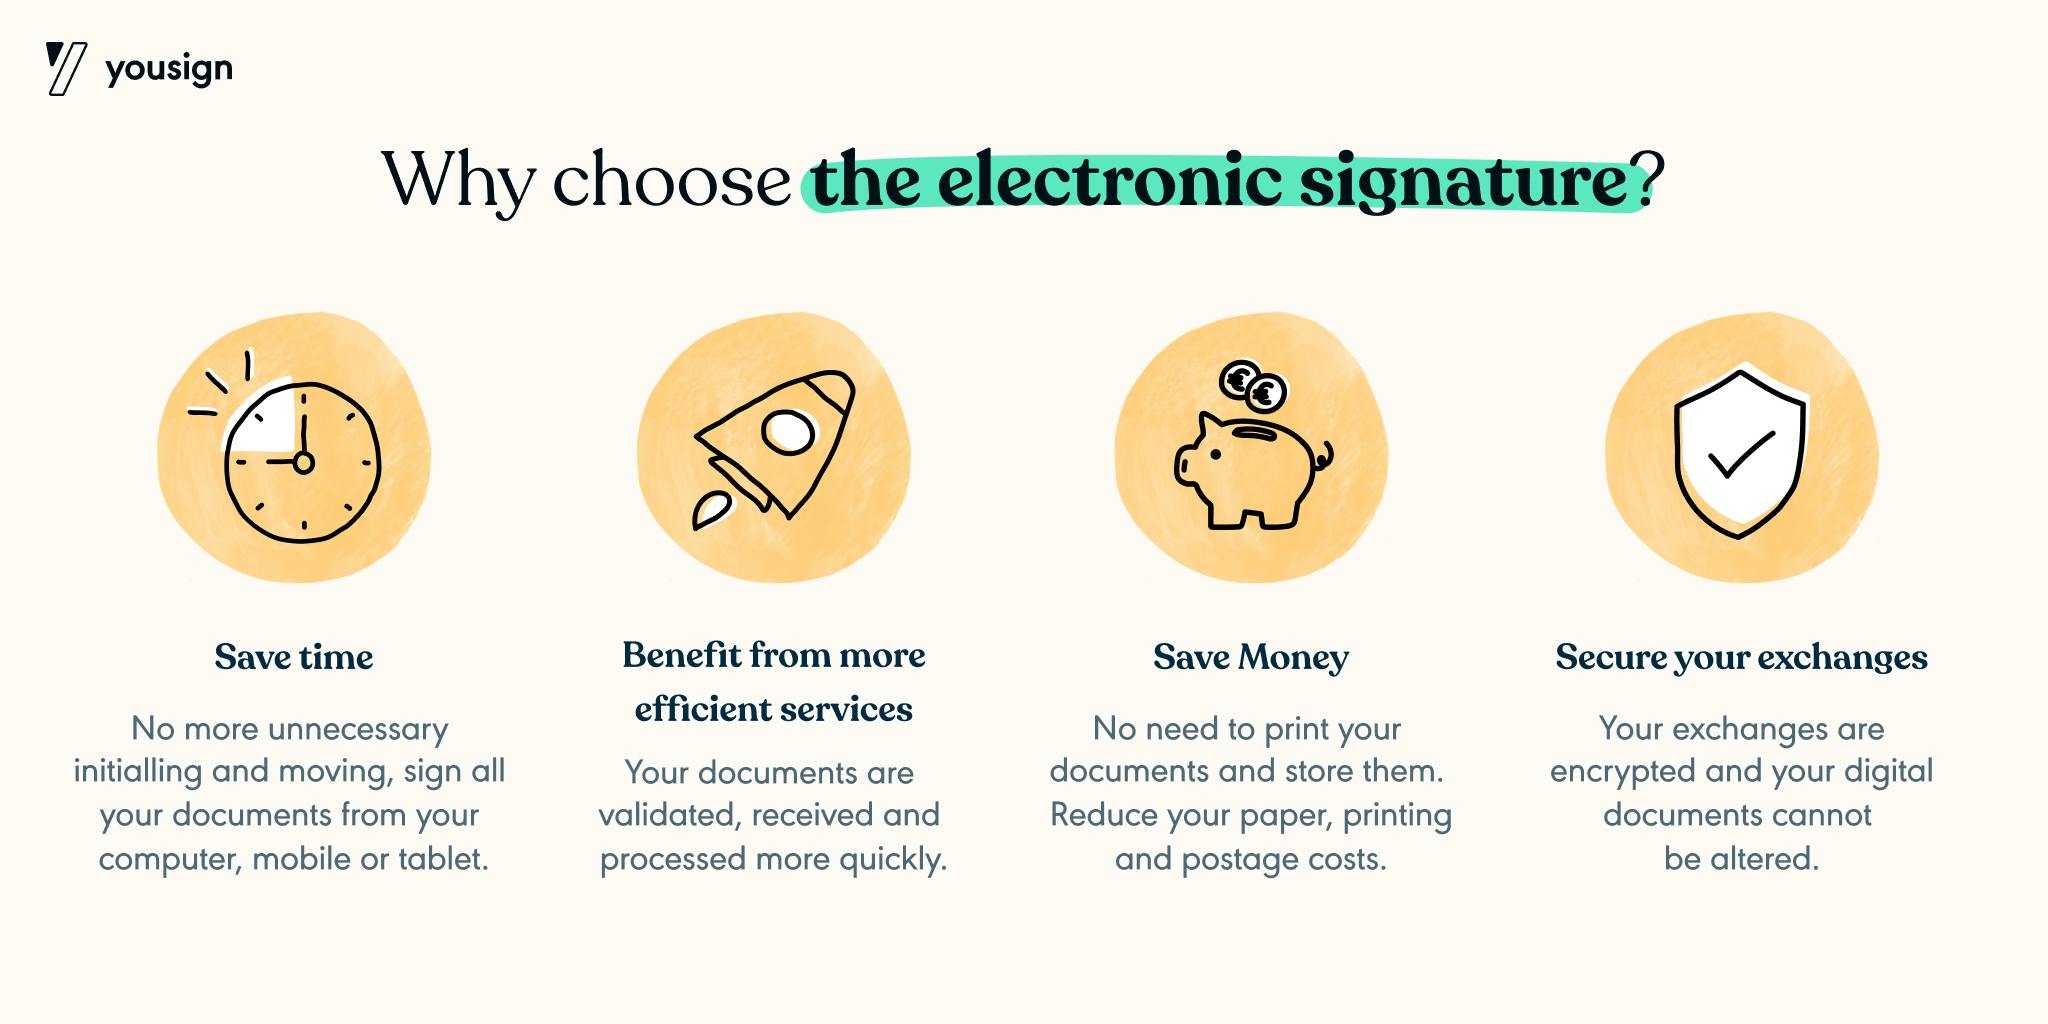 Why choose the electronic signature